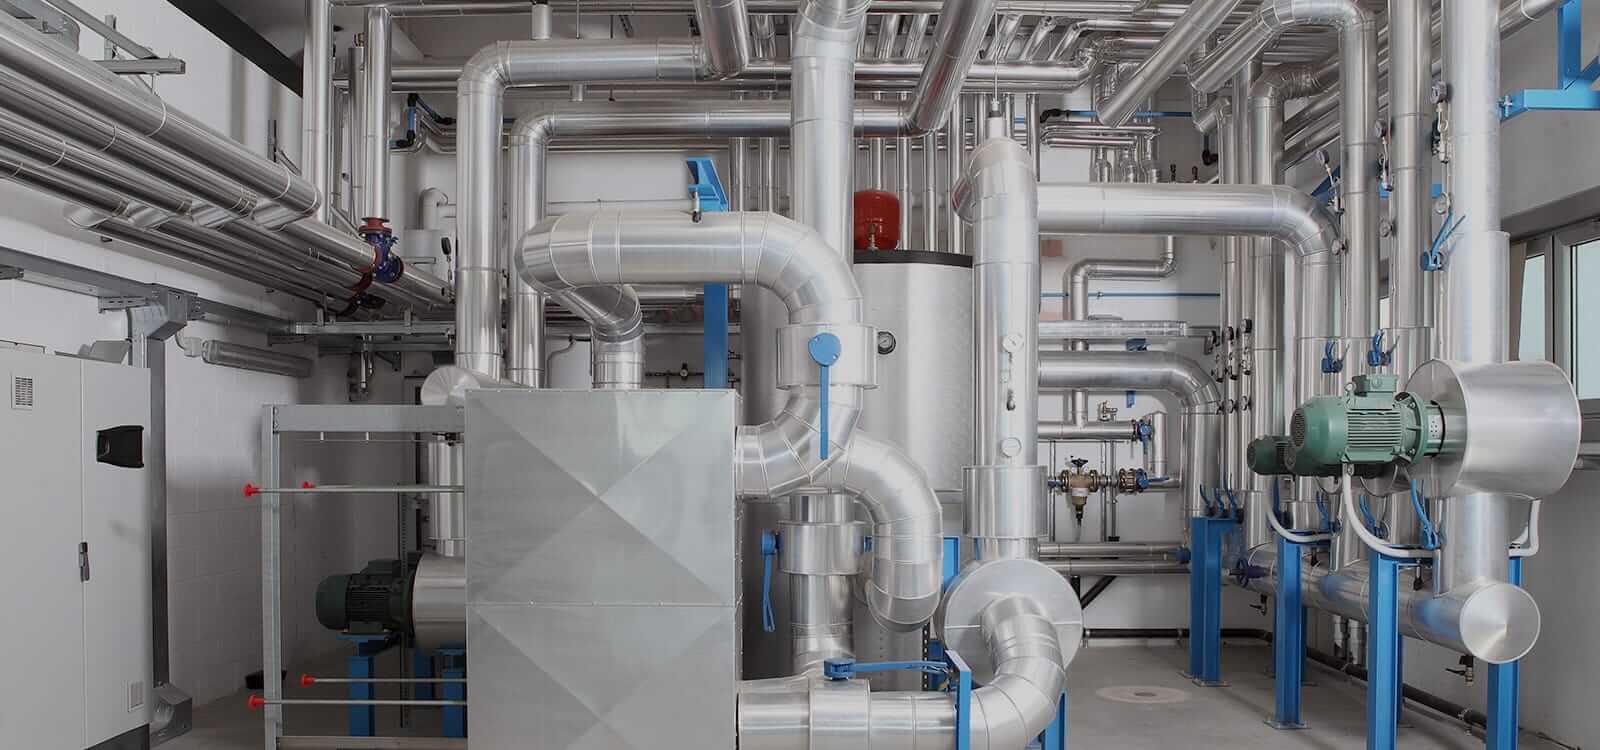 How Do HVAC Systems Work in Large Spaces